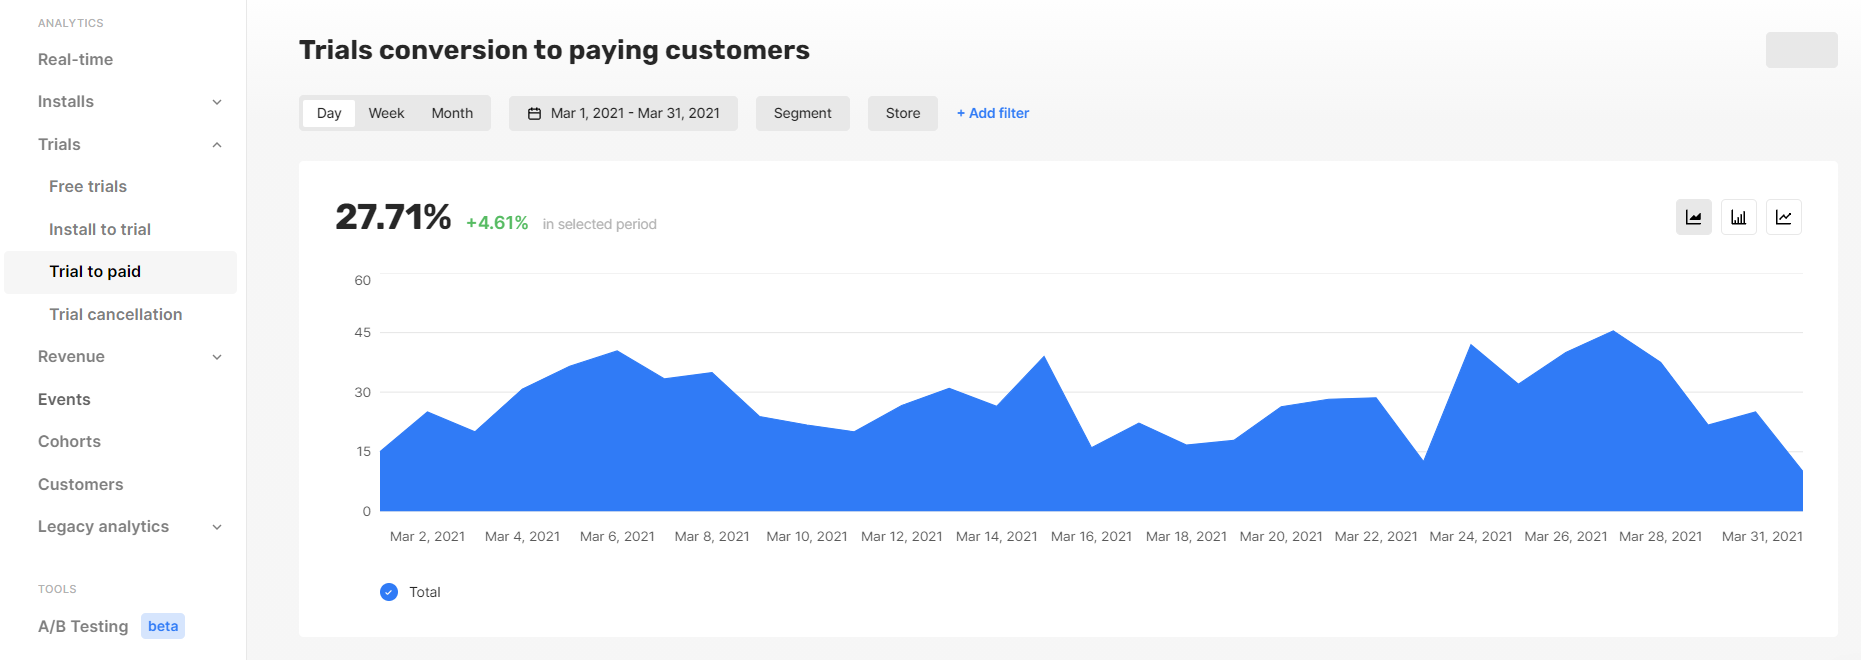 Trials conversion to paying customers - Mobile Analytics - Qonversion